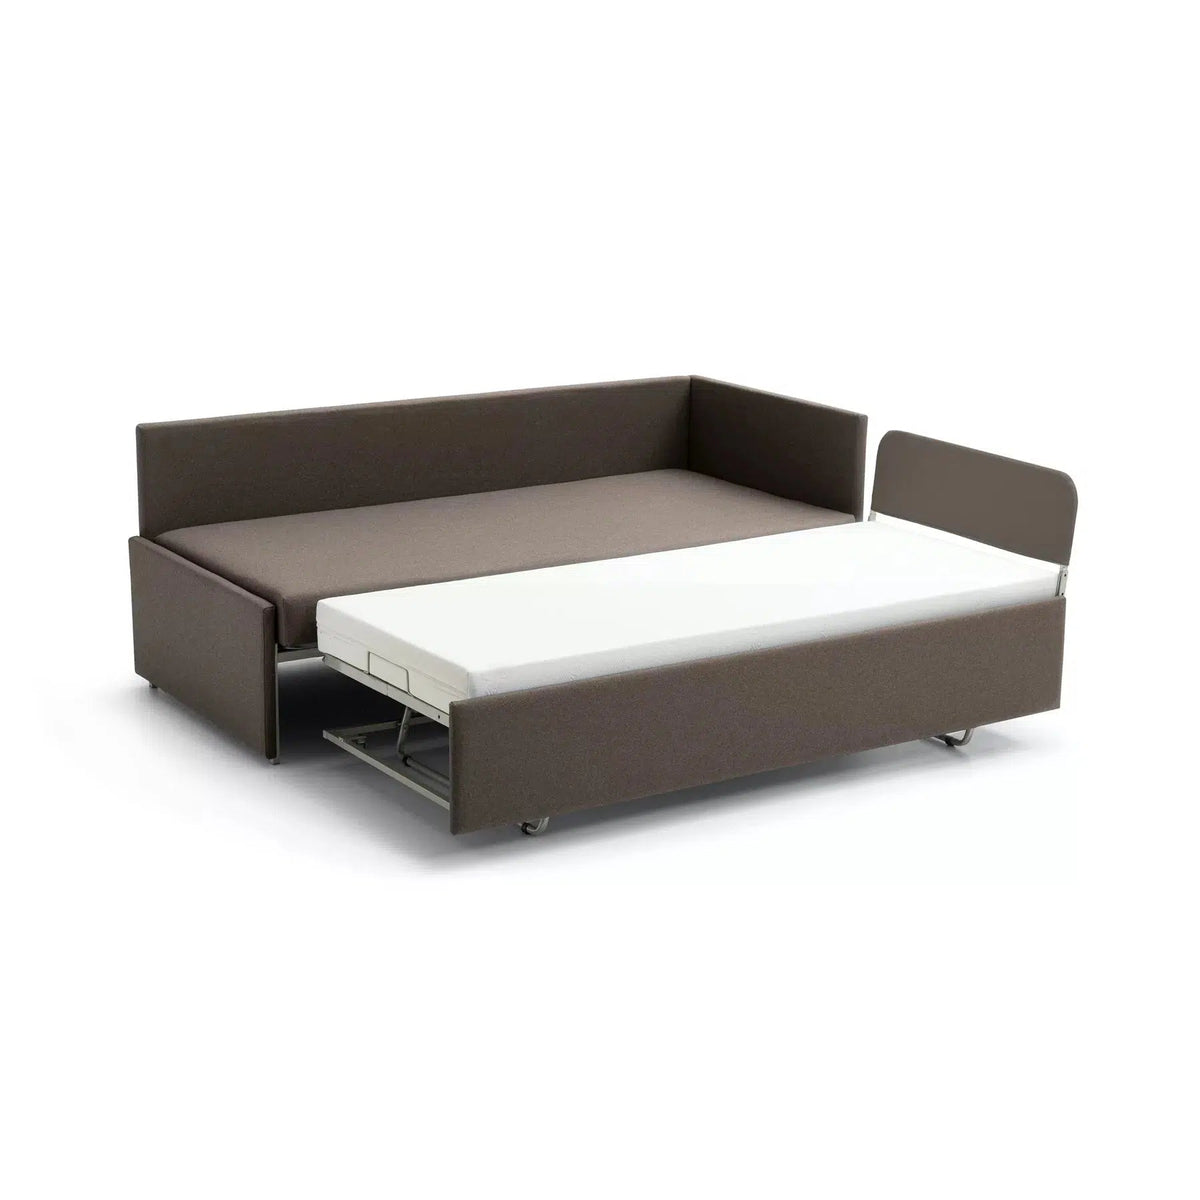 Parox 936 Chaise Longue Bed-TM Leader-Contract Furniture Store